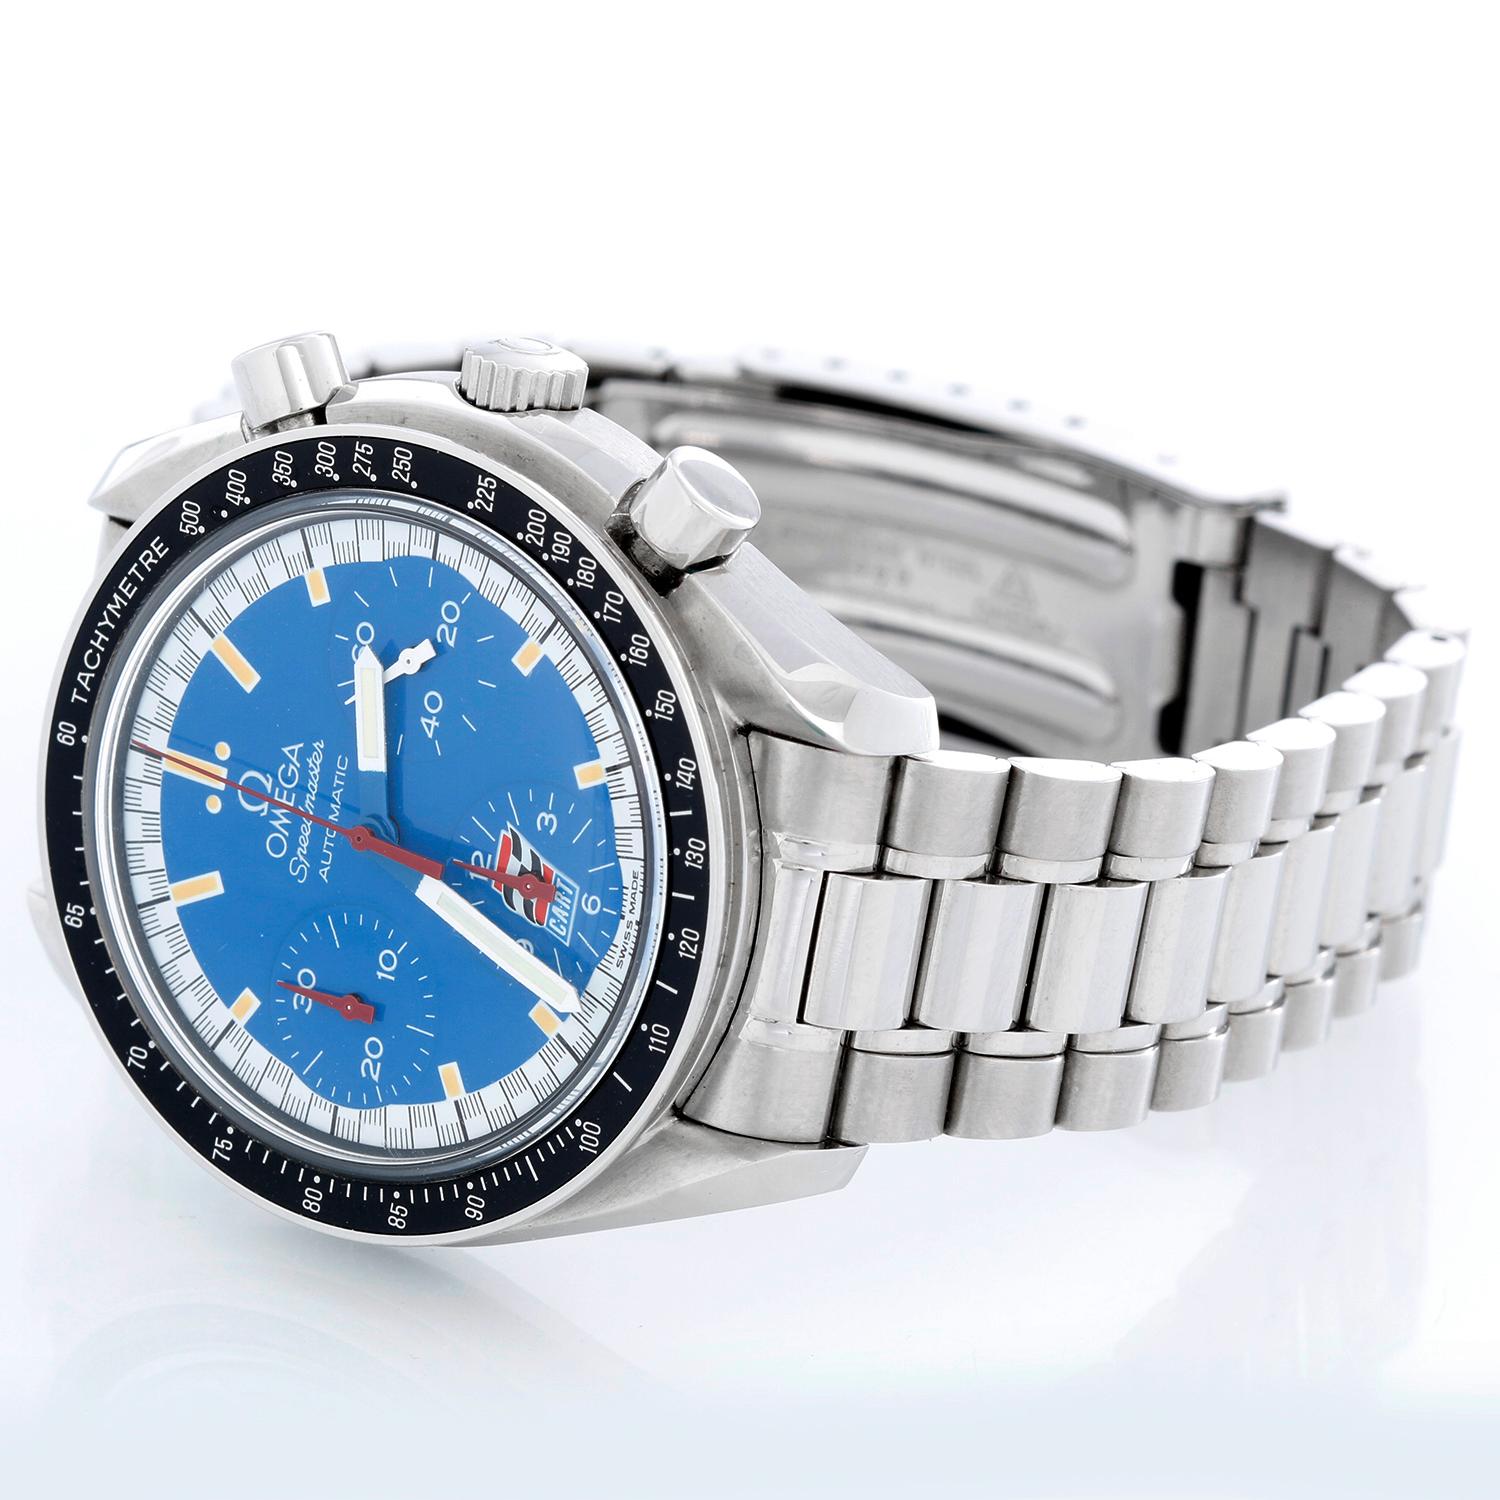 Omega Speedmaster Date Chronometer Automatic Schumacher Men's Watch 3510.80.00 - Automatic winding; chronograph, with date. Stainless steel case and tachymeter bezel with black insert (40mm diameter). Blue Cart racing dial with hour, minute and